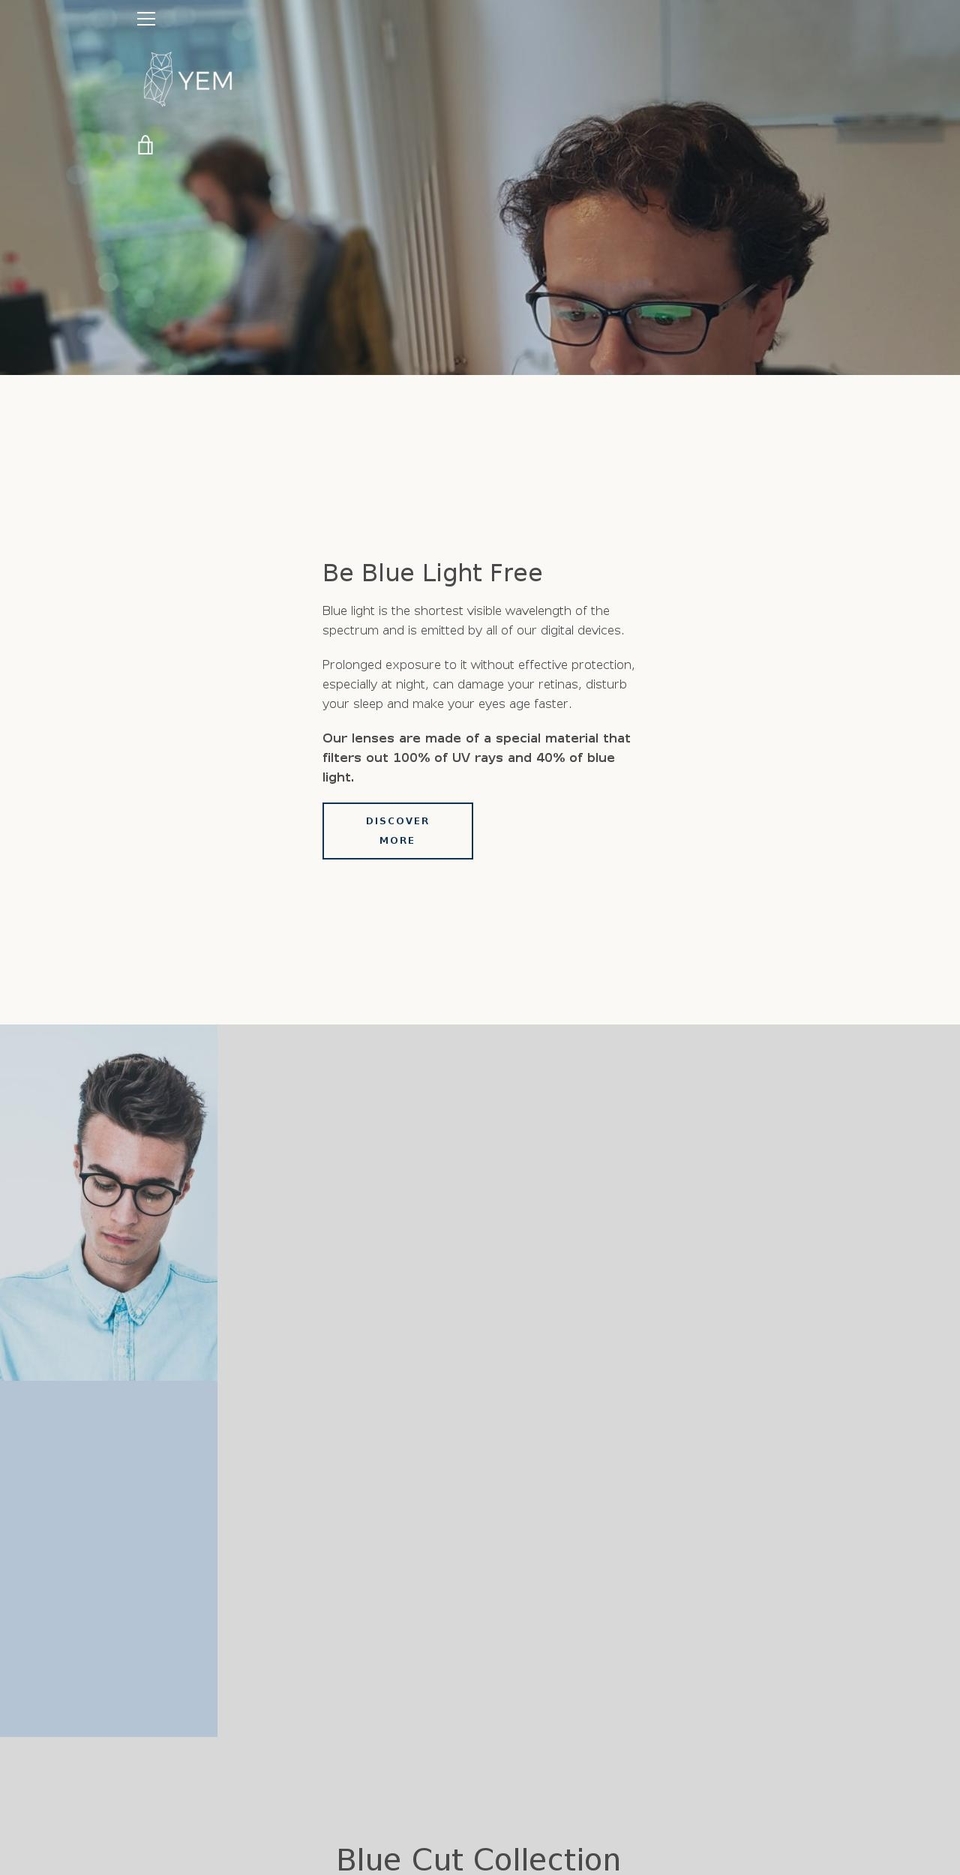 YEM_Official Theme_March18 Shopify theme site example yemglasses.com